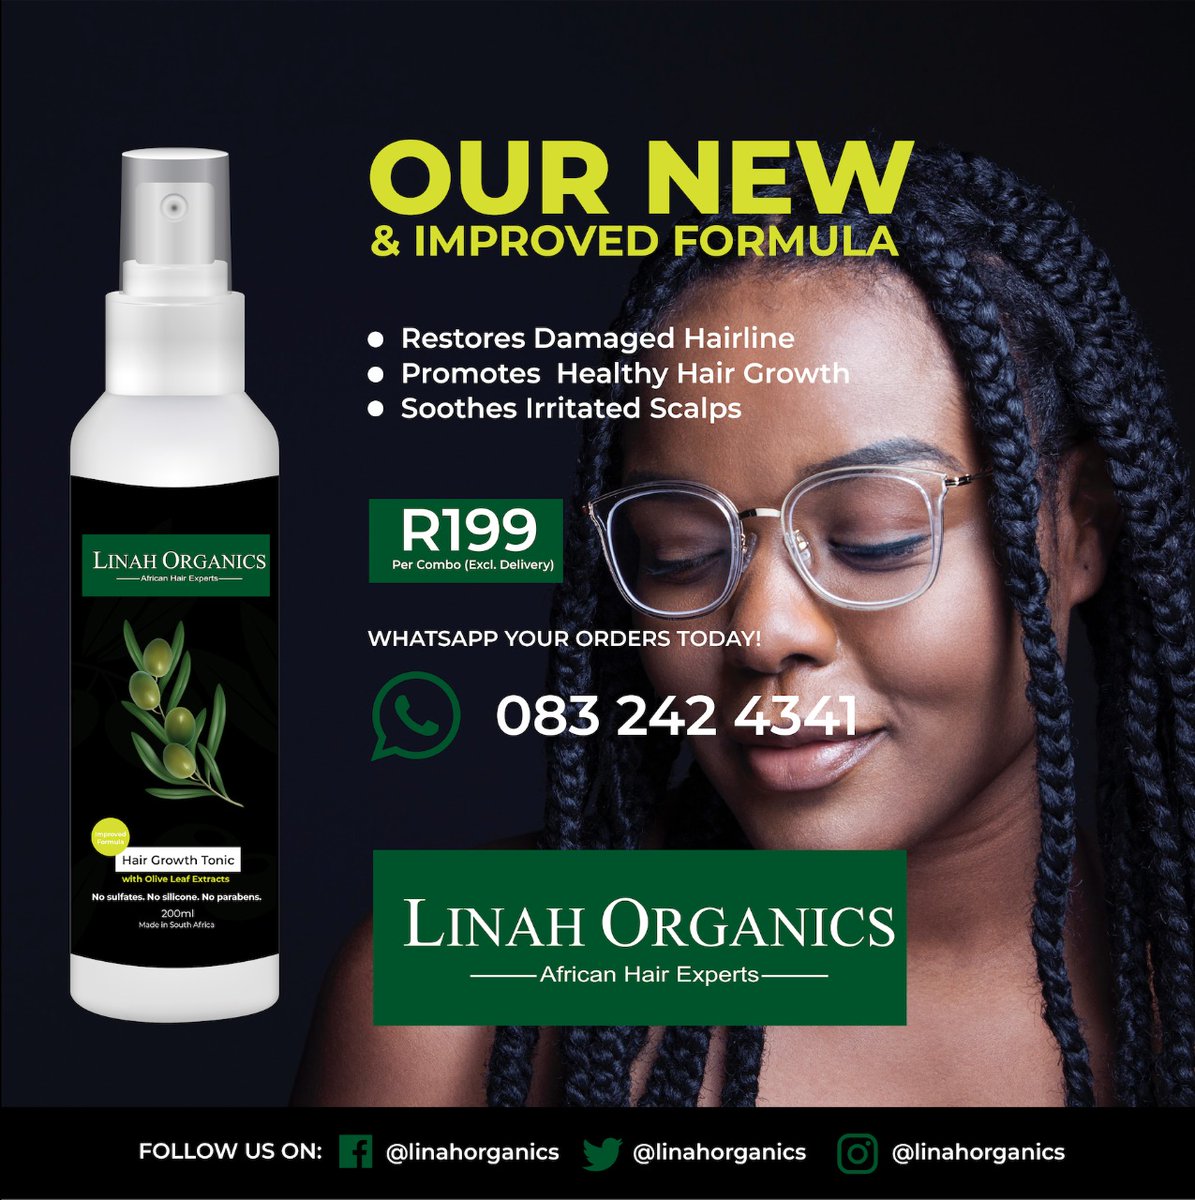 Have you tried our hair growth tonic?

✔️ Repairs dameged hair
✔️ Promotes healthy hair growth 

WhatsApp your order to 0832424341

Get yours for only R199.00
Facebook : Linahorganics 

#Keahustle #GirltalkZA